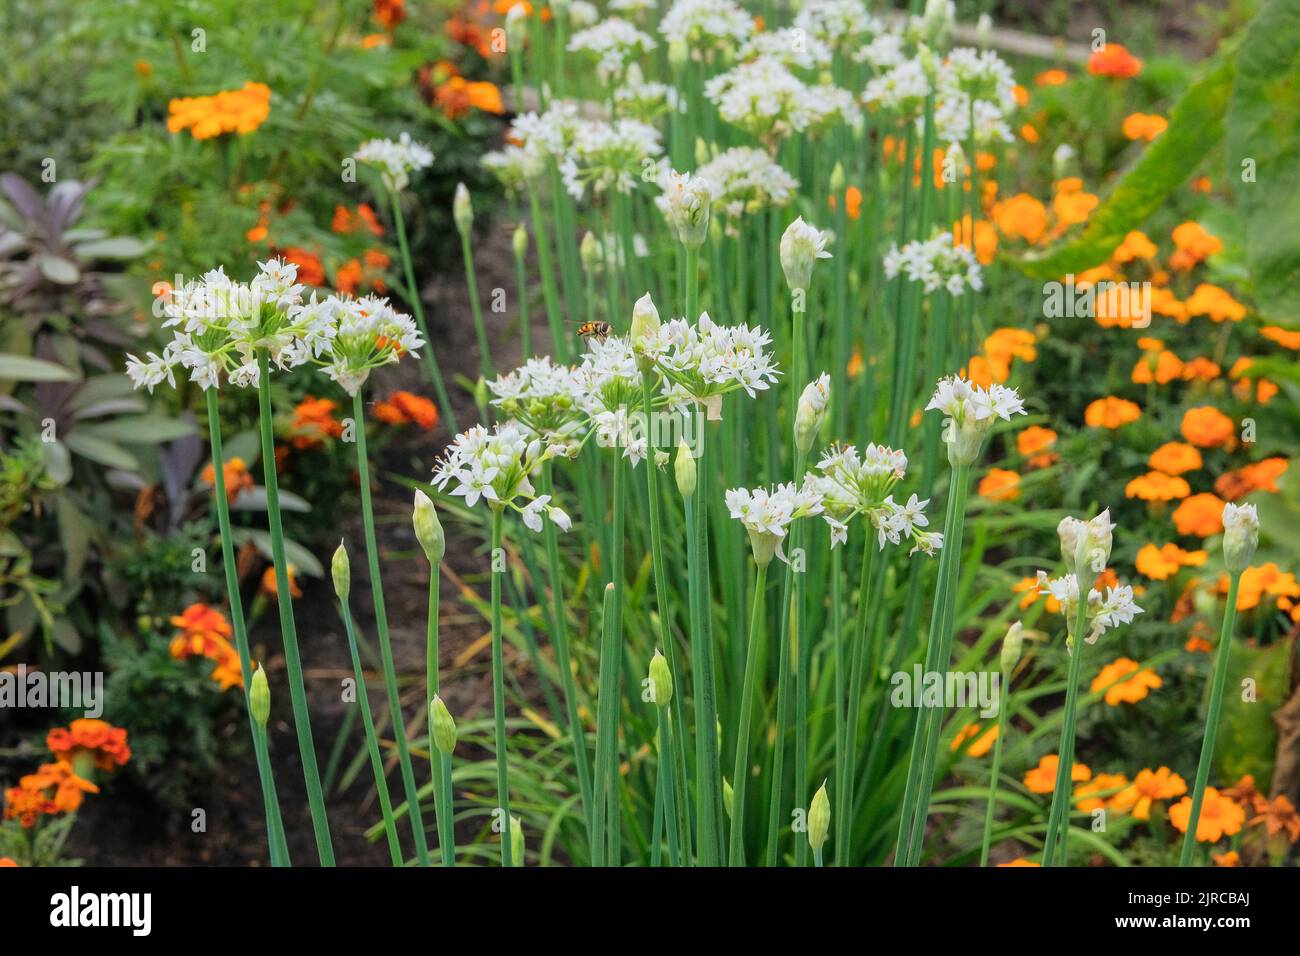 Onion flowers in farming and harvesting. Organic vegetables grown in a rural farm garden. Growing vegetables at home. Stock Photo